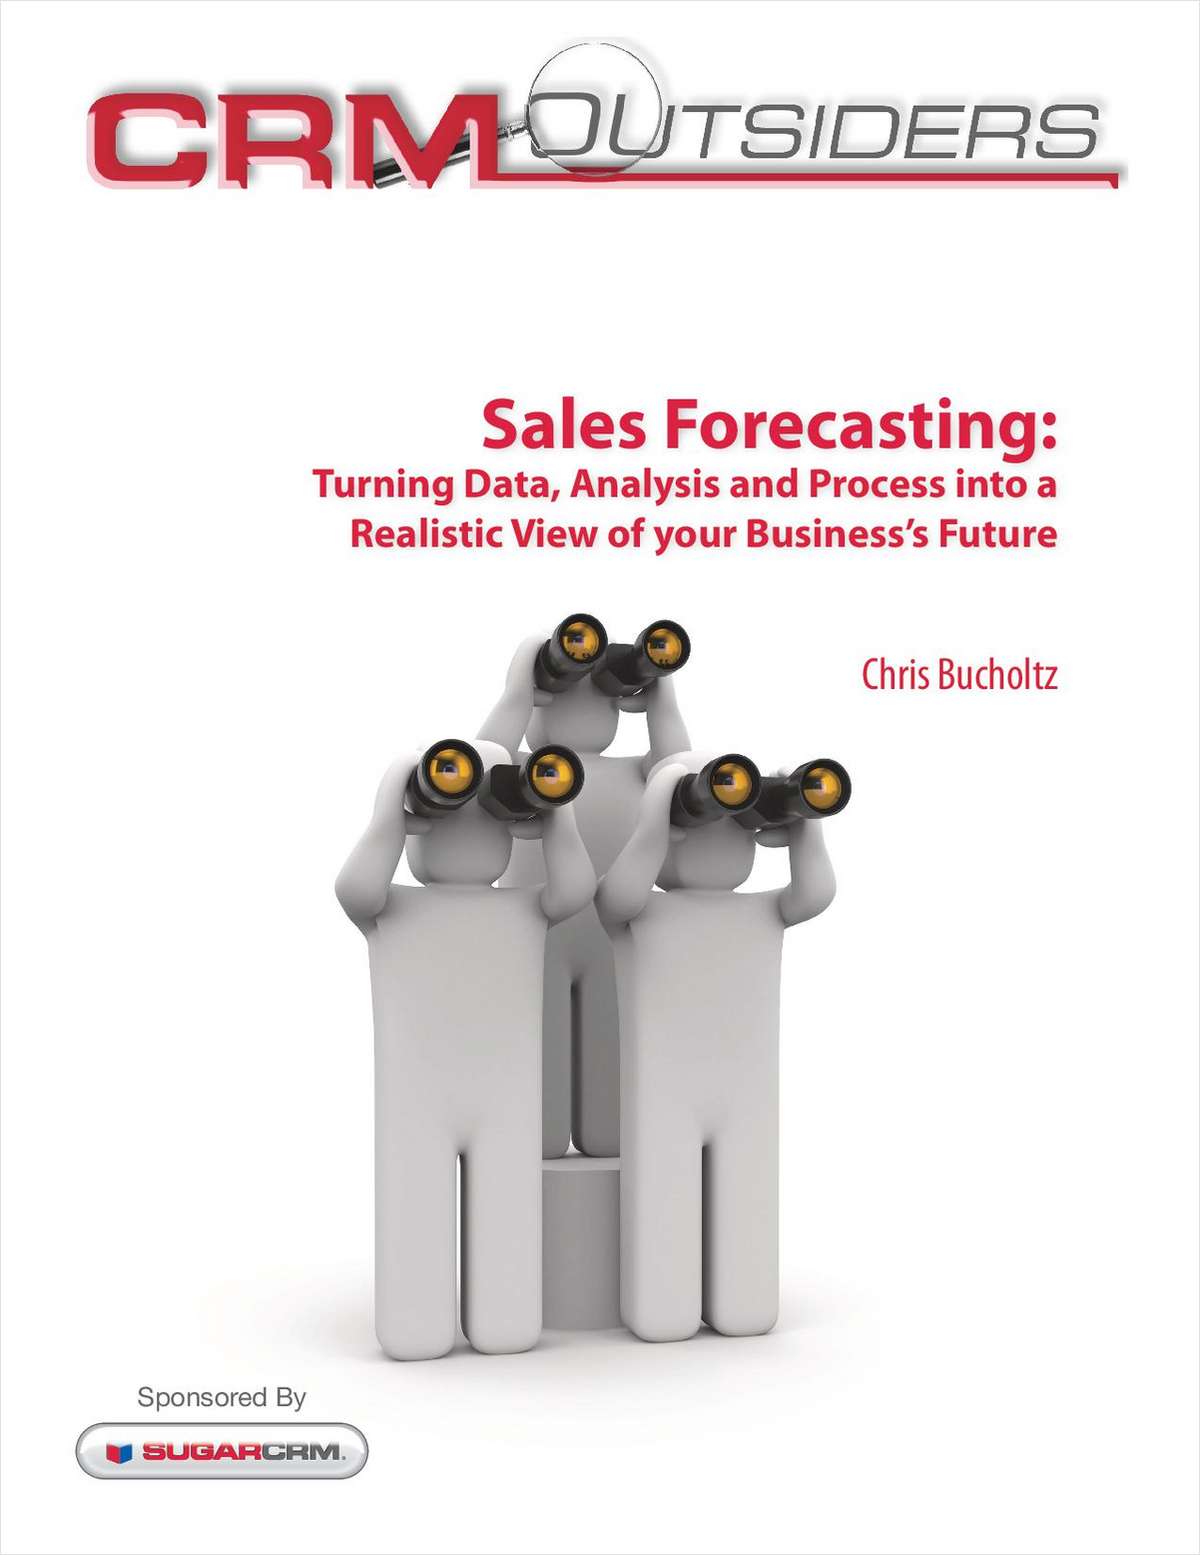 Sales Forecasting: Turning Data, Analysis and Process into a Realistic View of your Business's Future